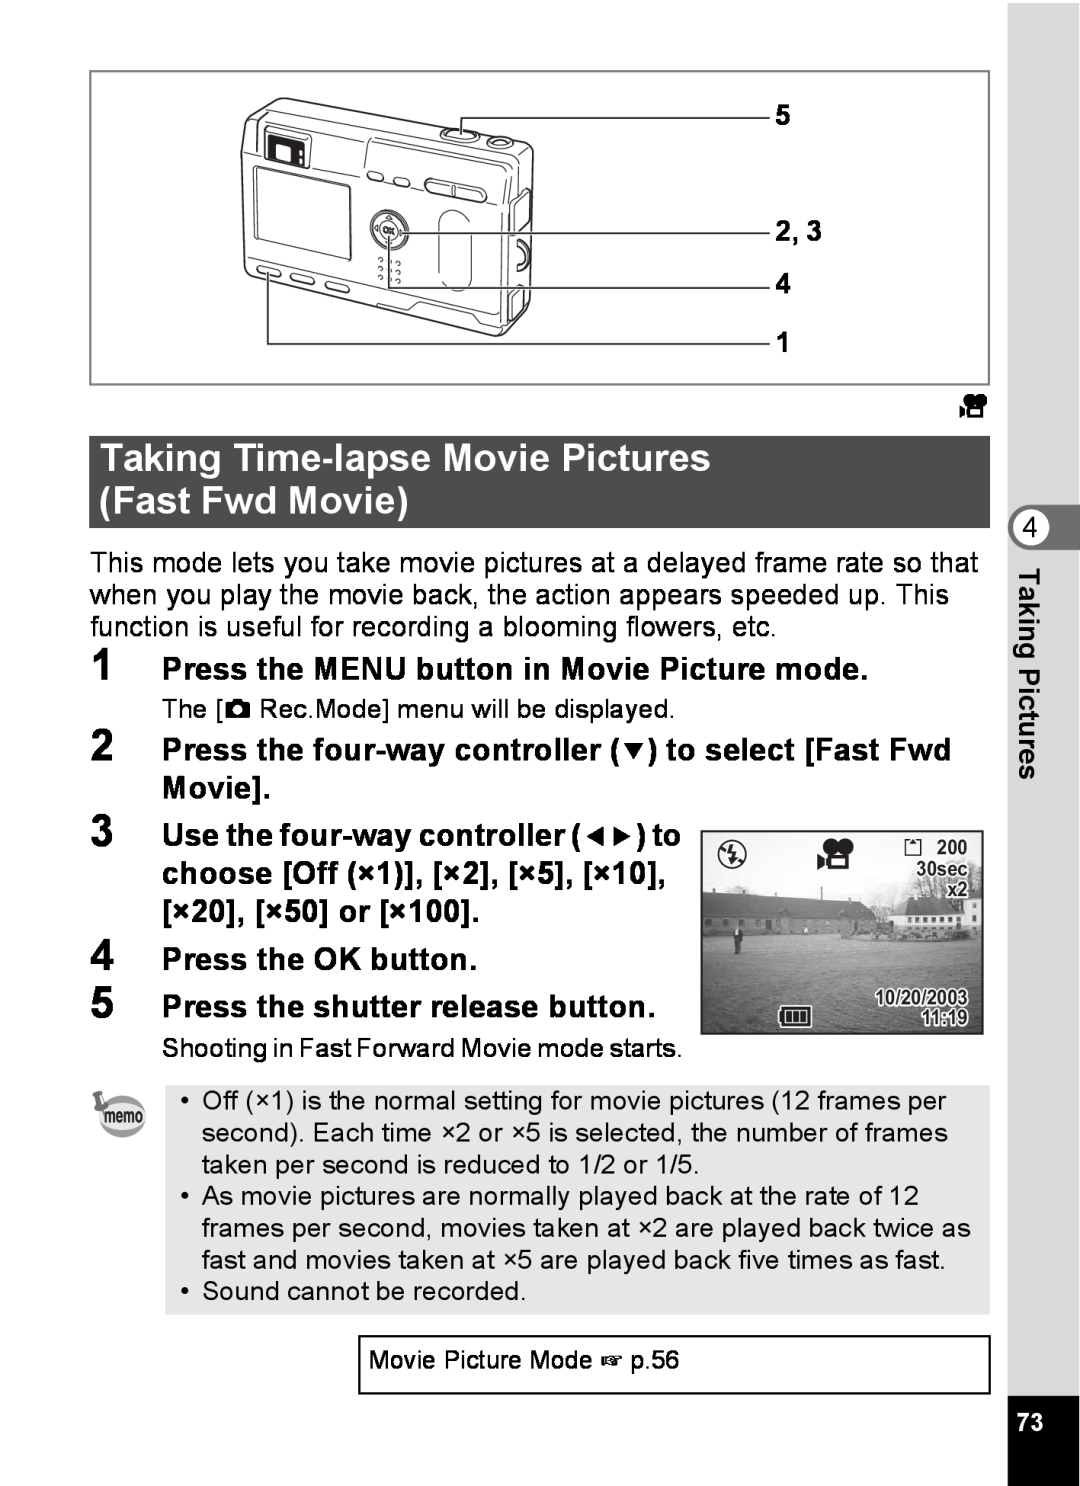 Pentax S4 Taking Time-lapse Movie Pictures Fast Fwd Movie, Press the MENU button in Movie Picture mode, ×20, ×50 or ×100 